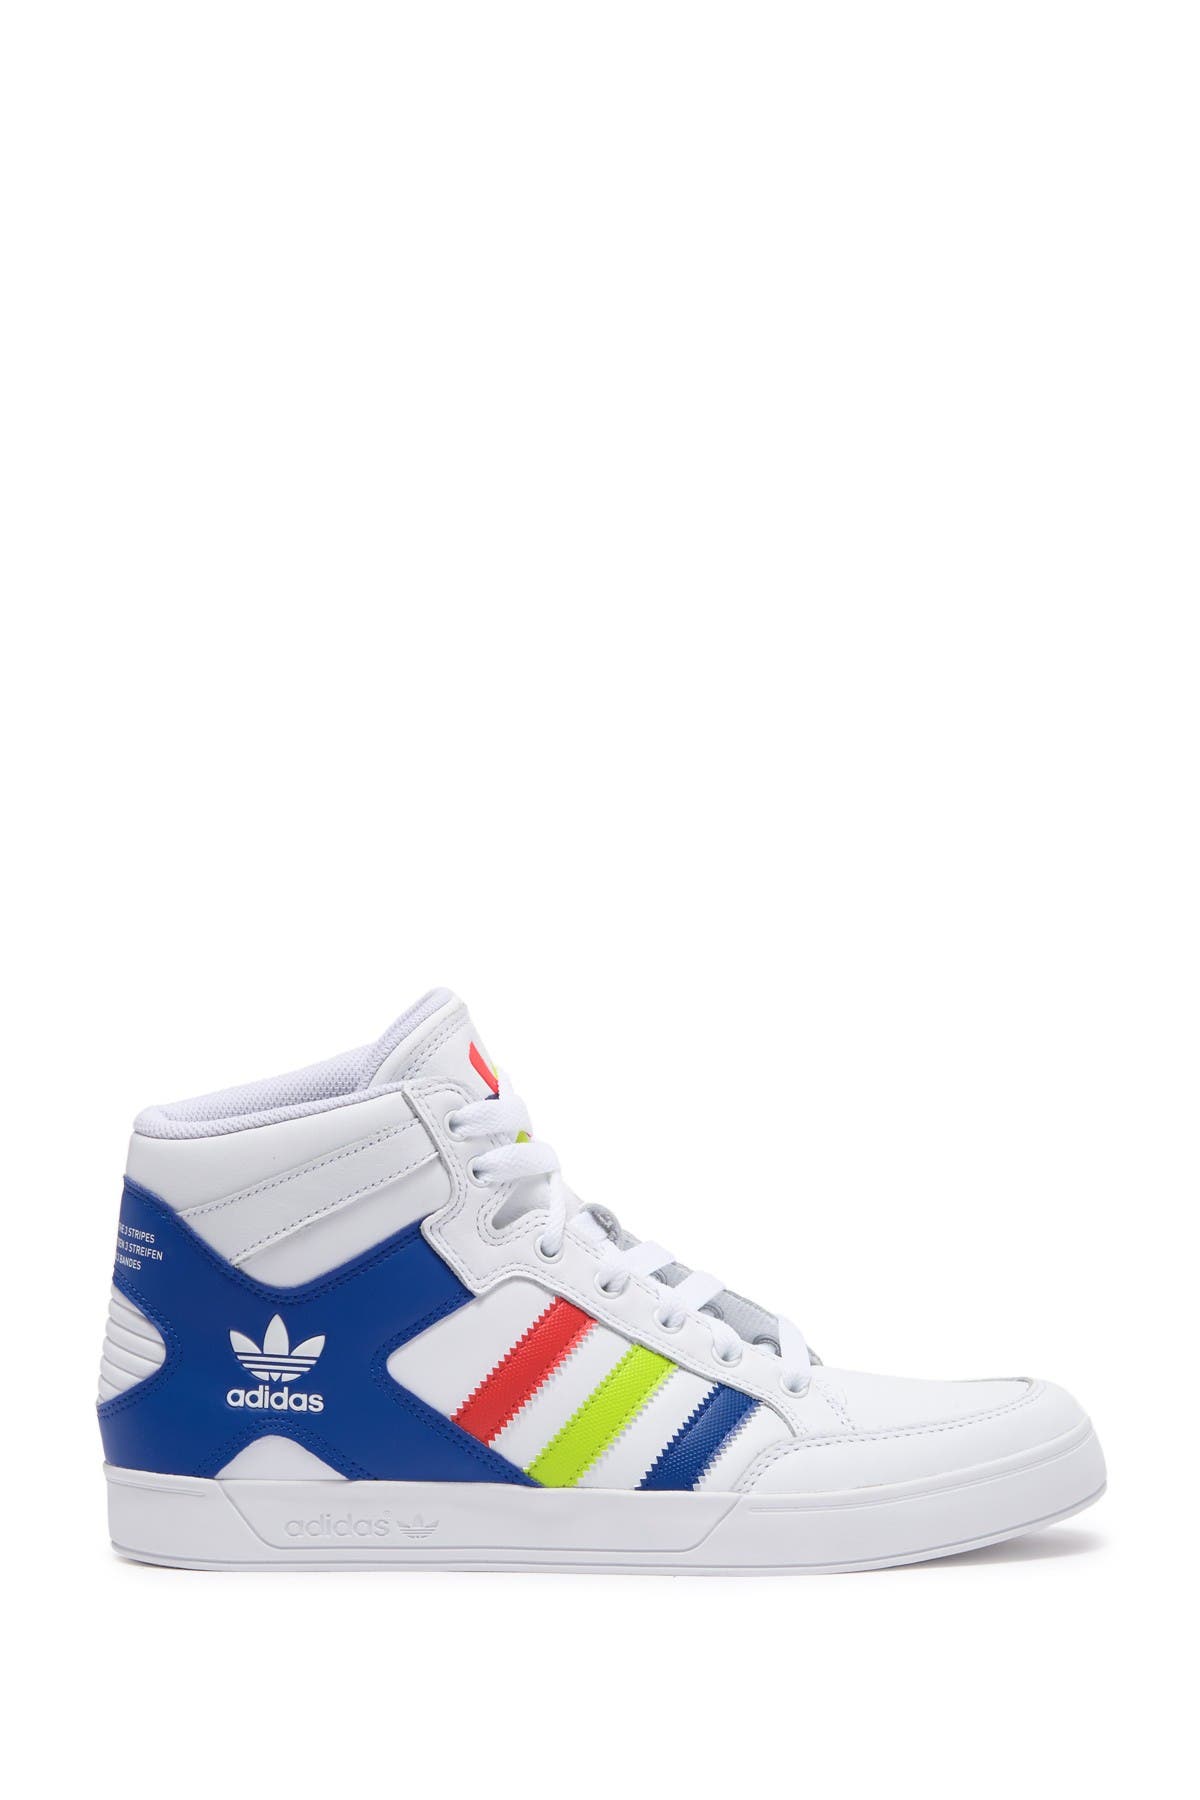 adidas women's shoes hardcourt high top casual sneakers